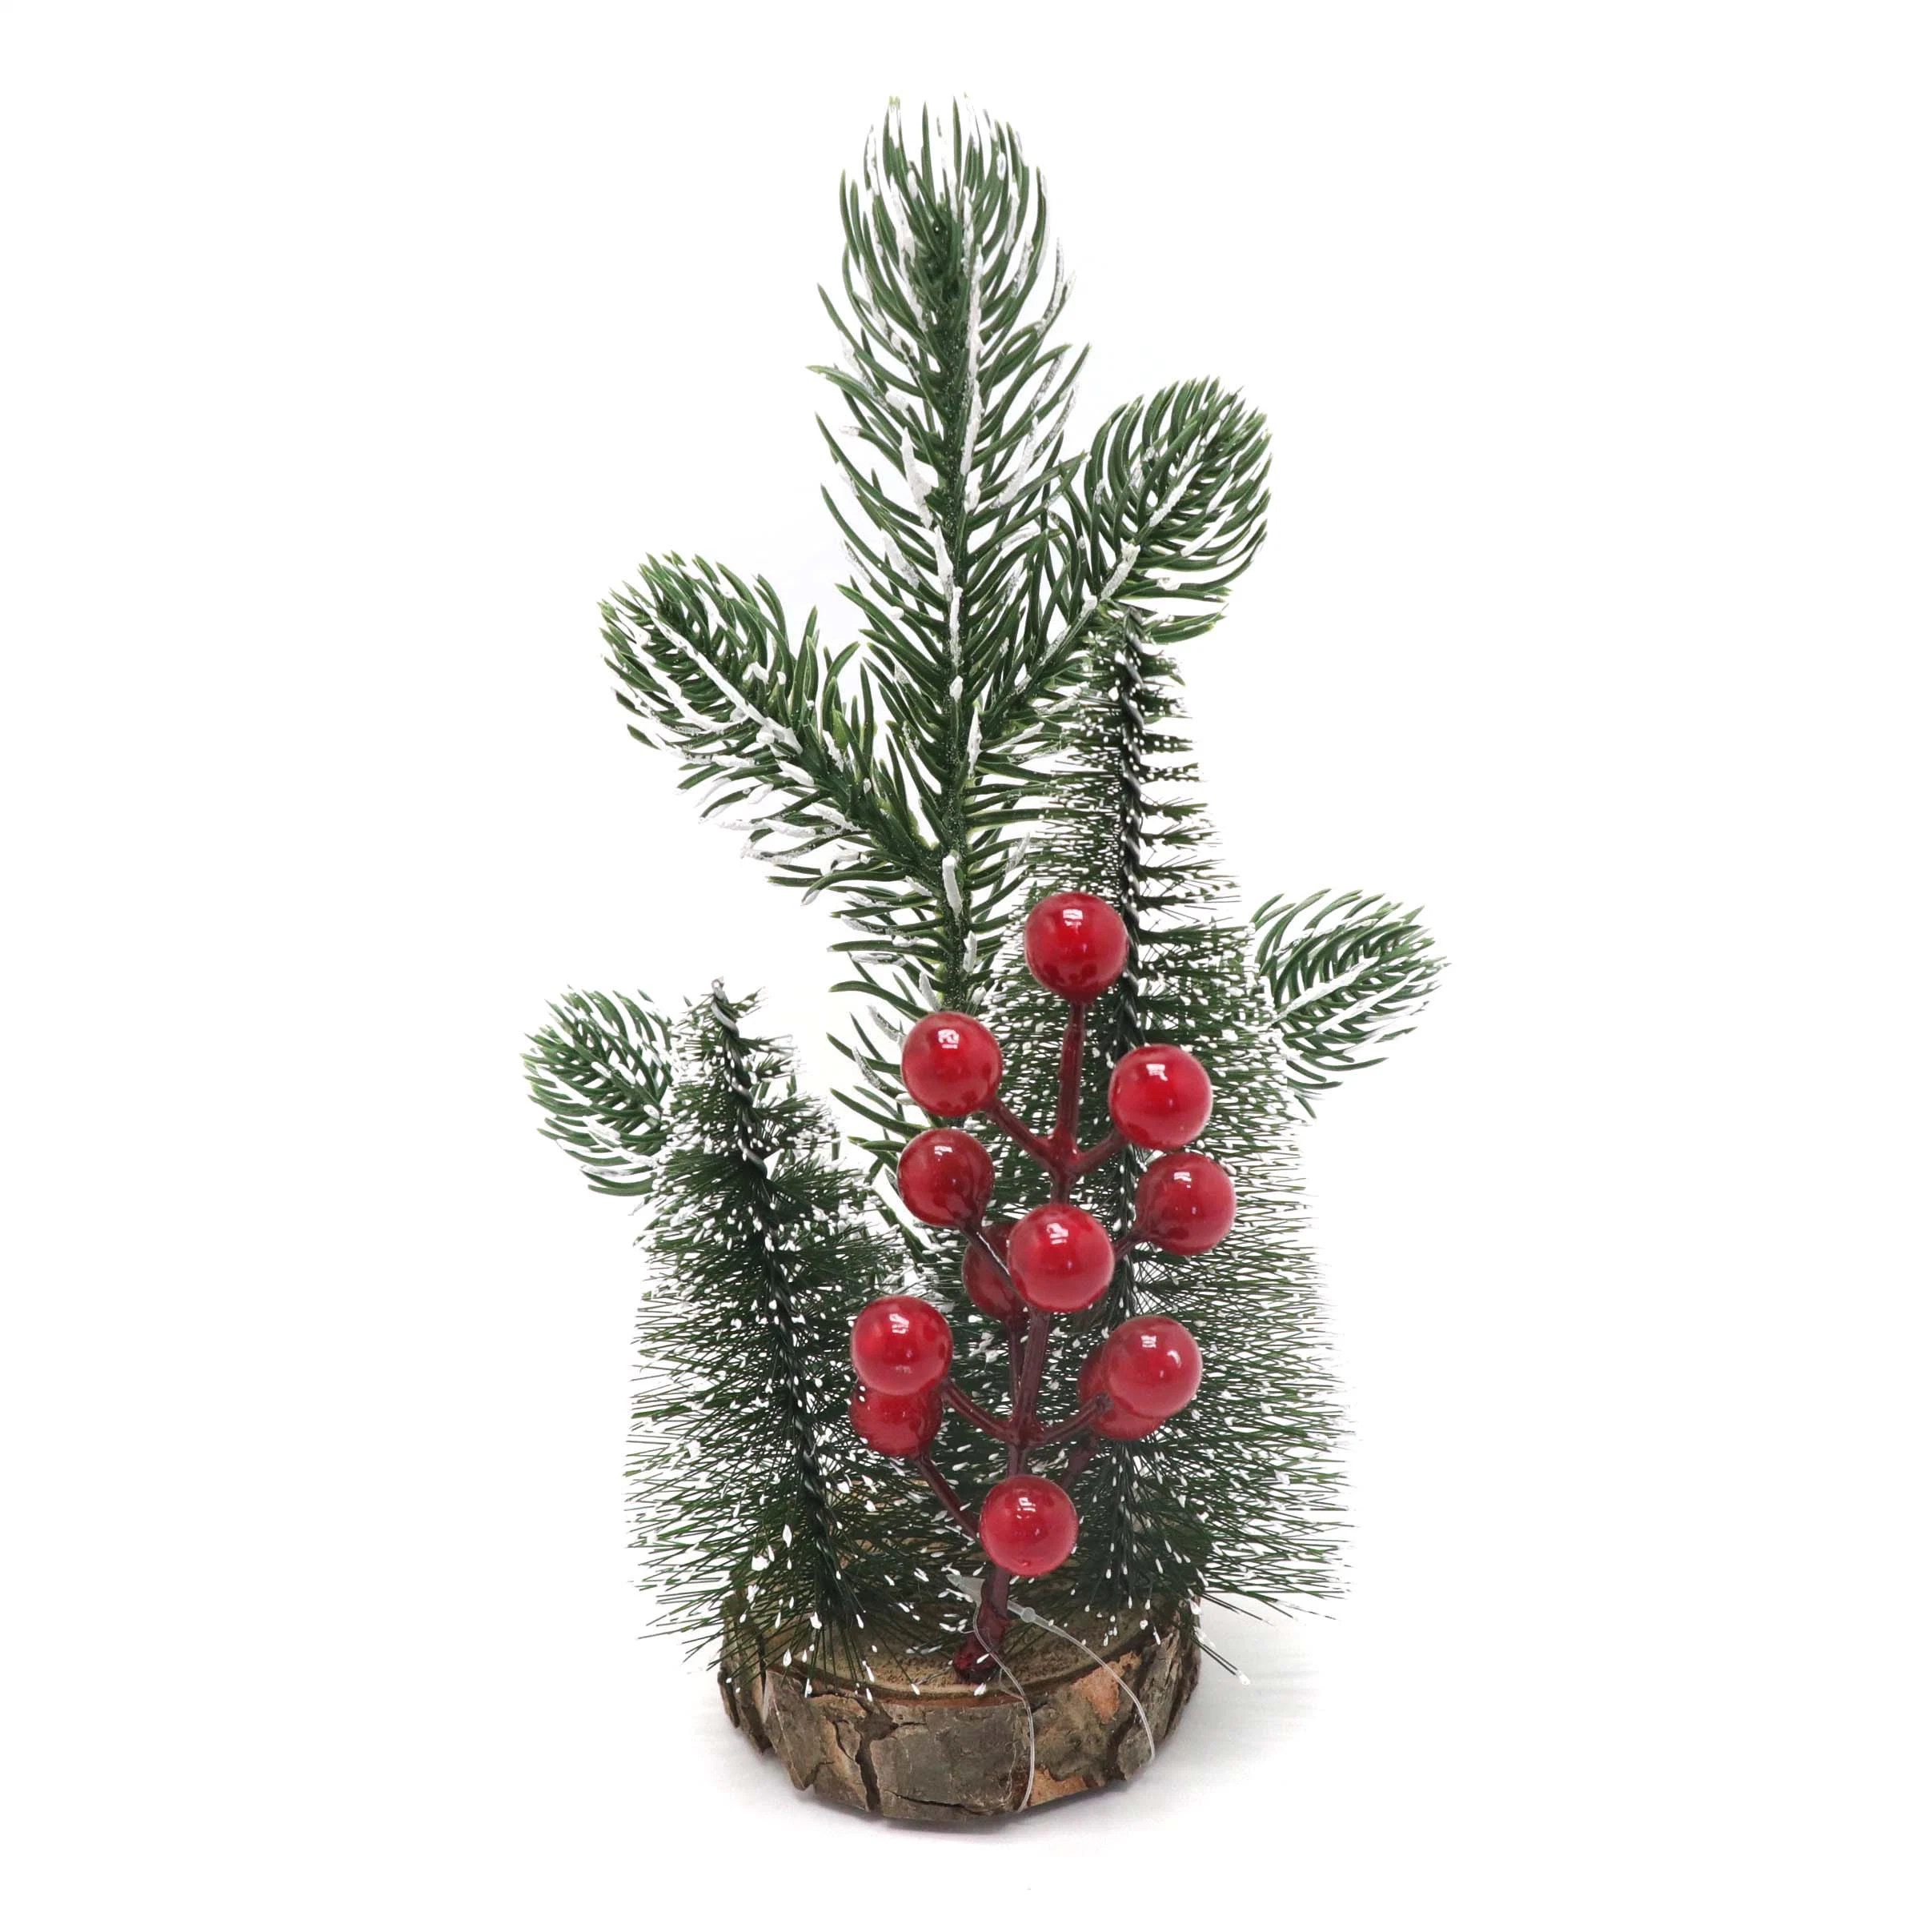 Christmas Decorations Red Berries Pine Needles Christmas Tree Miniature Small Trees Children Love Holiday Decorations Christmas Trees